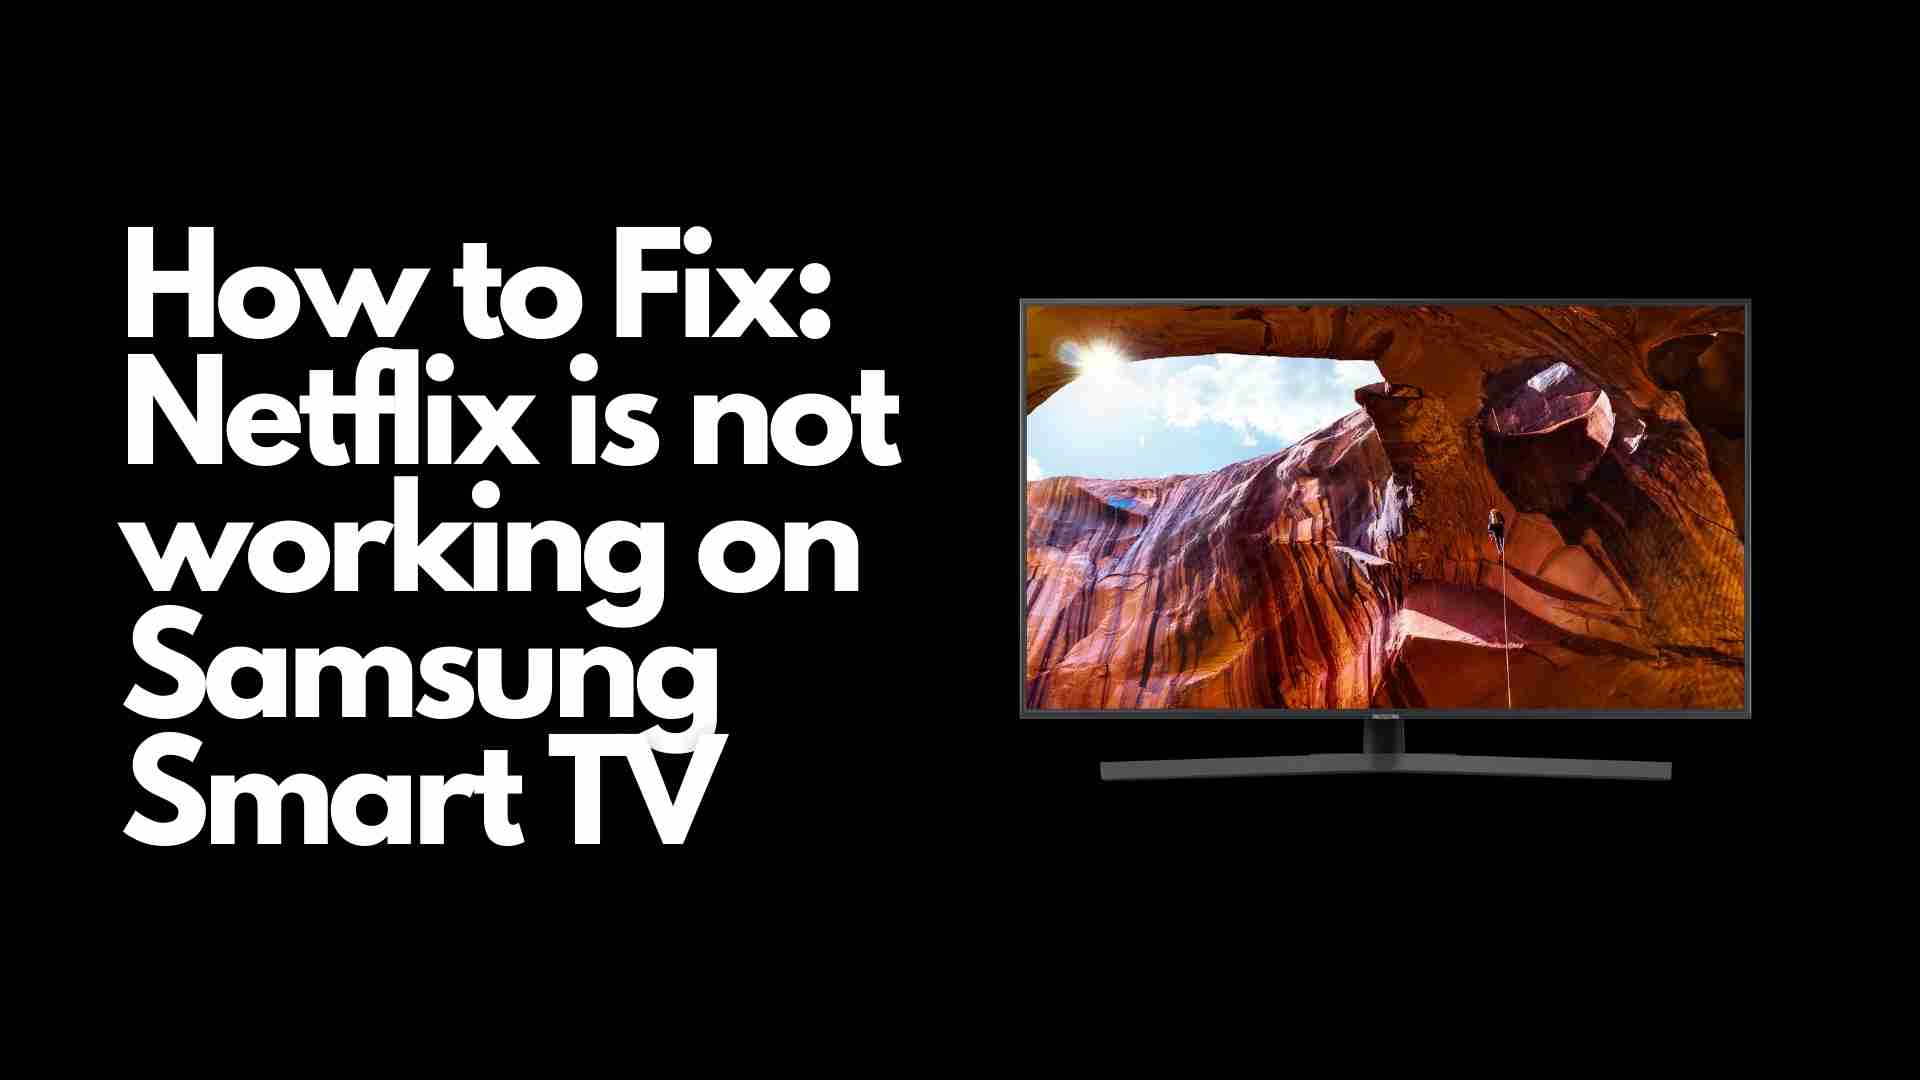 How to Fix Netflix is not working on Samsung Smart TV